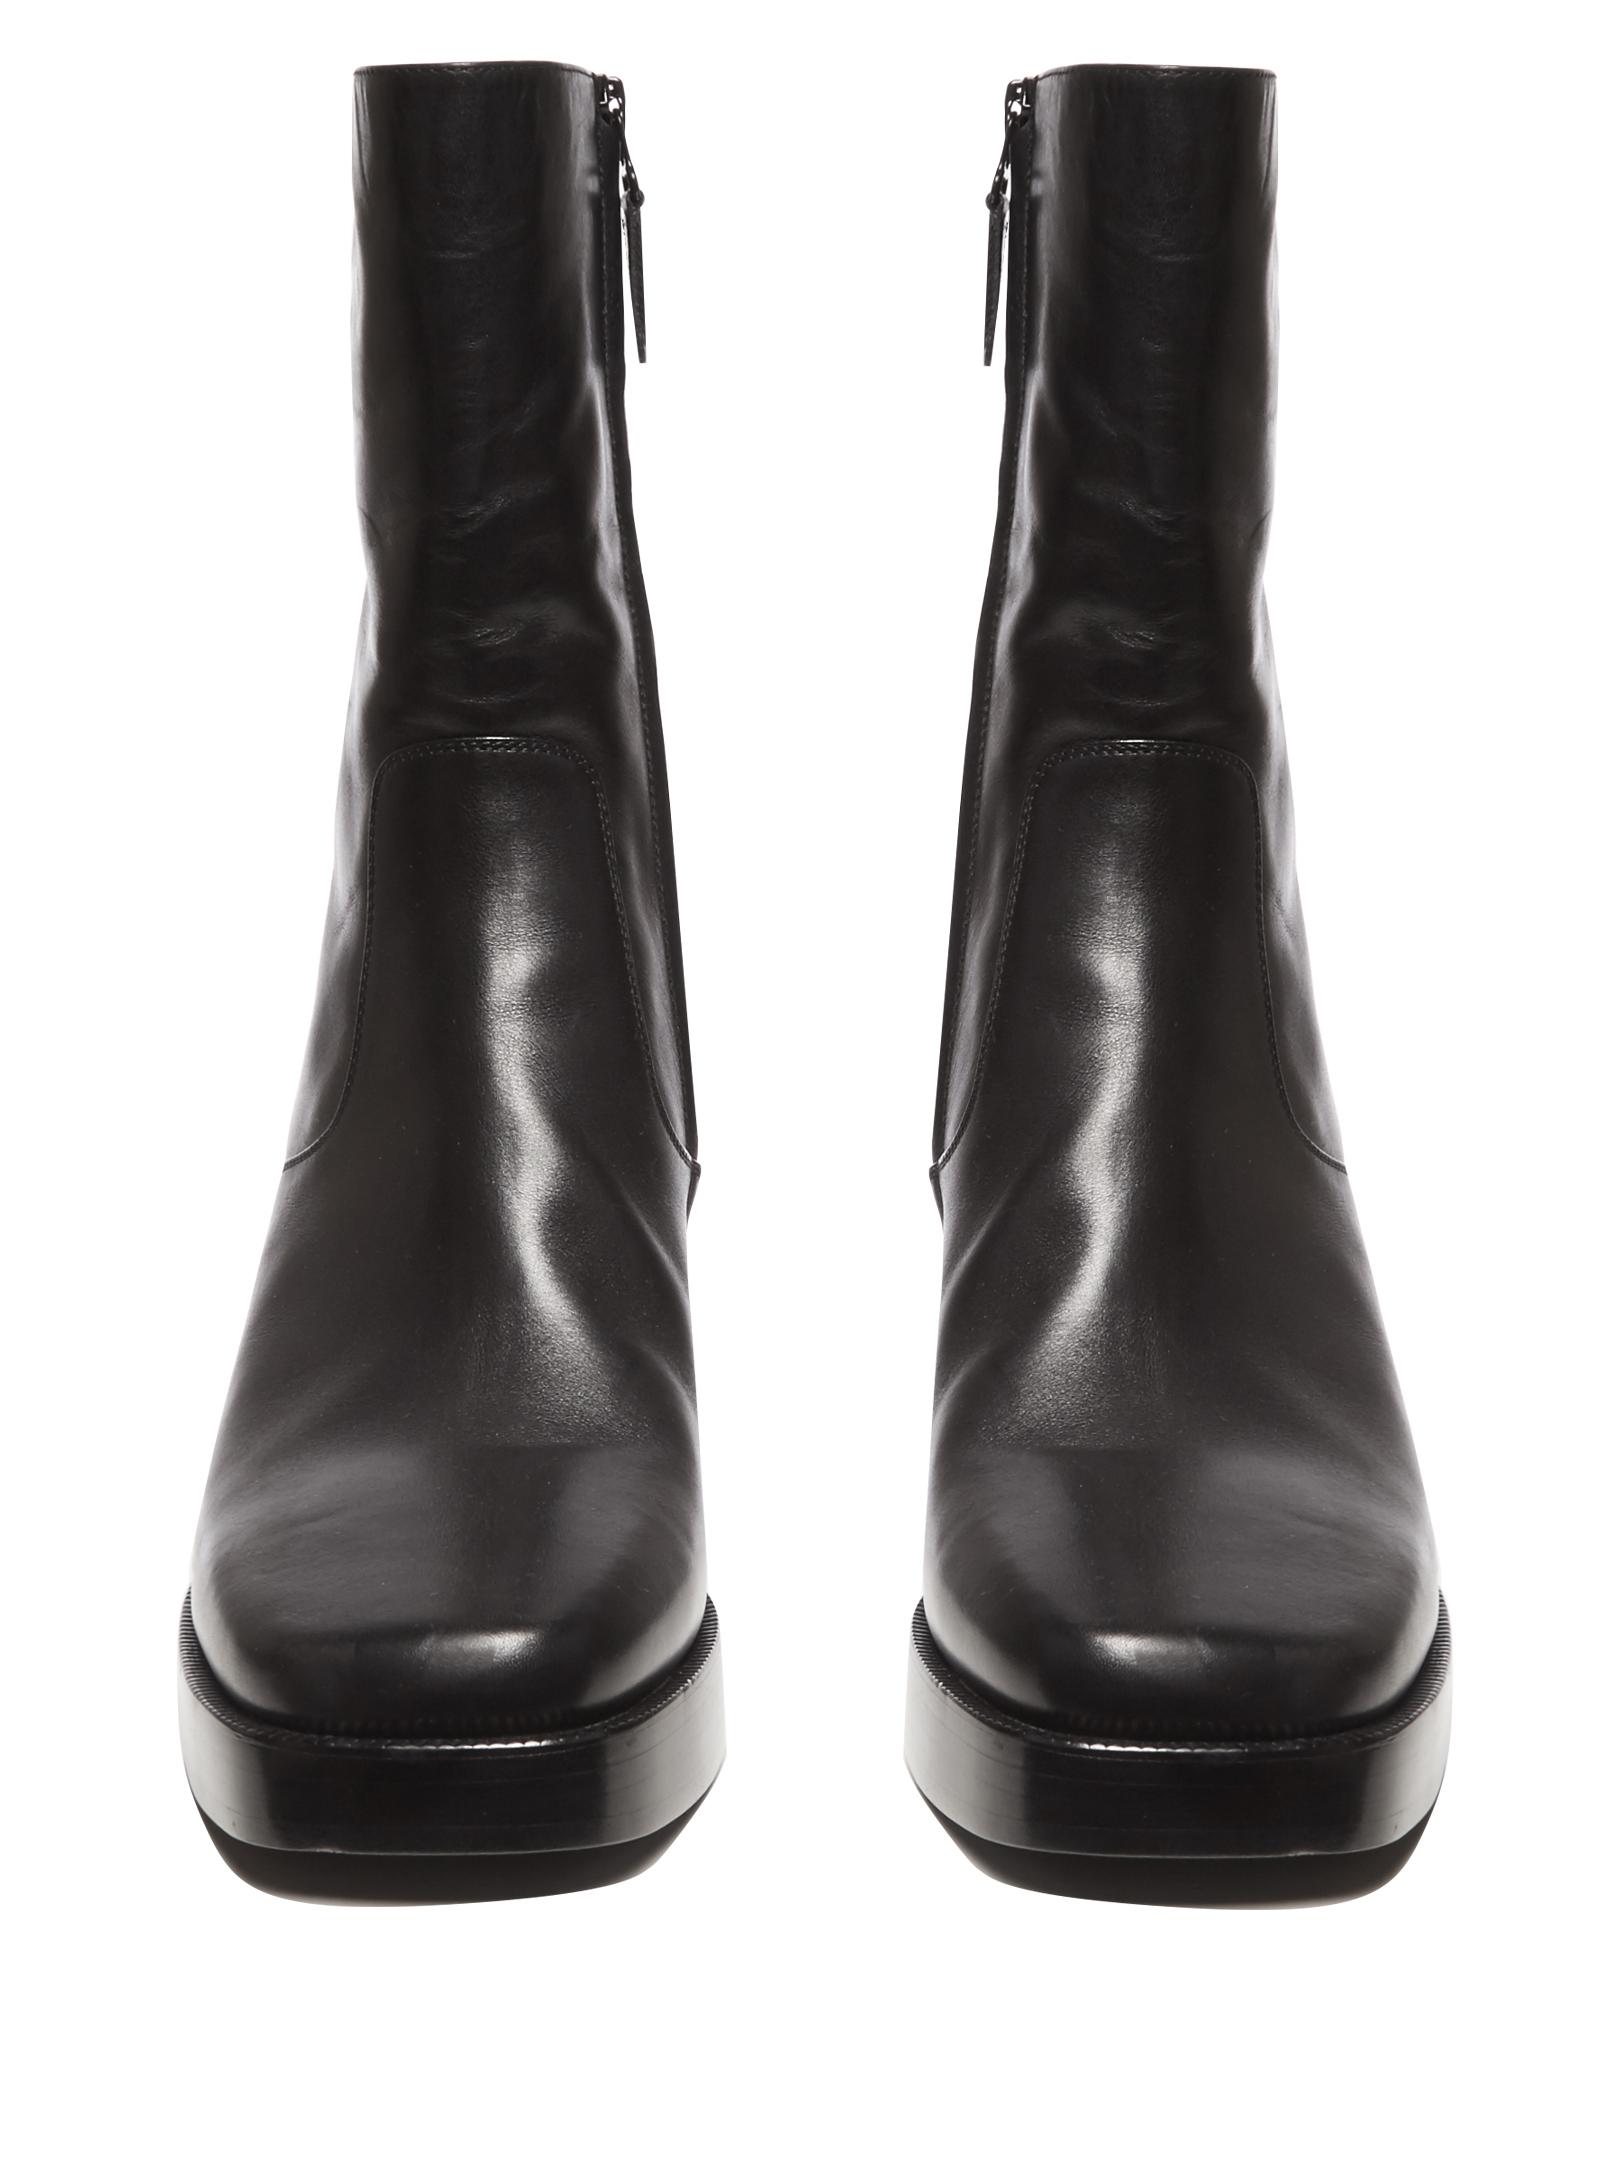 Lyst - Balenciaga Leather Platform Boots in Black for Men